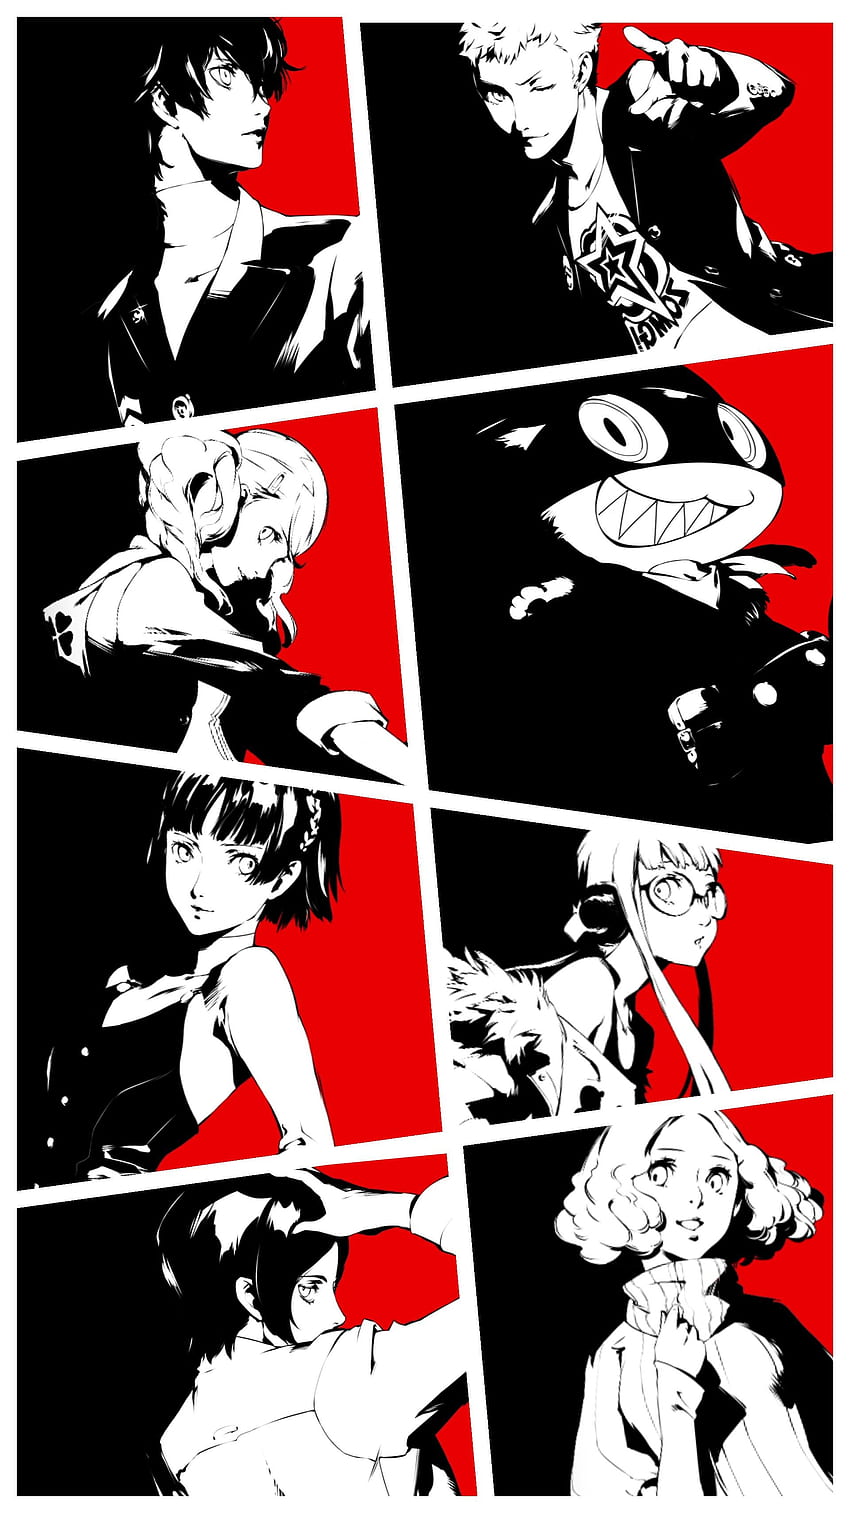 Another phone for anyone who wants it. : Persona5 HD phone wallpaper ...